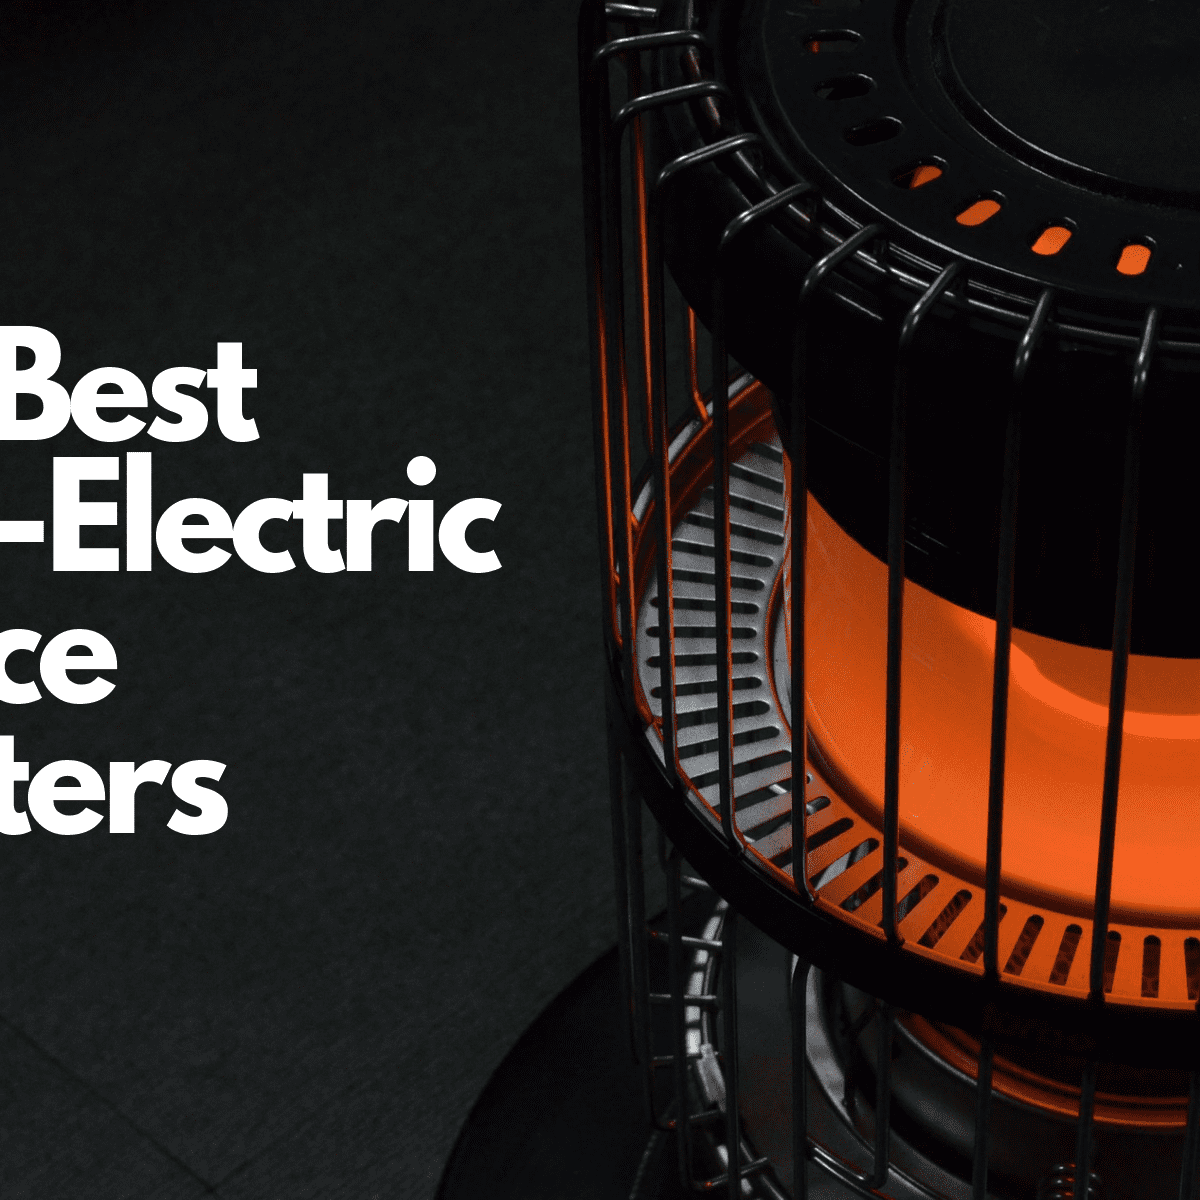 Winter Camping with a Diesel Heater - Is it Safe? - The Gear Bunker